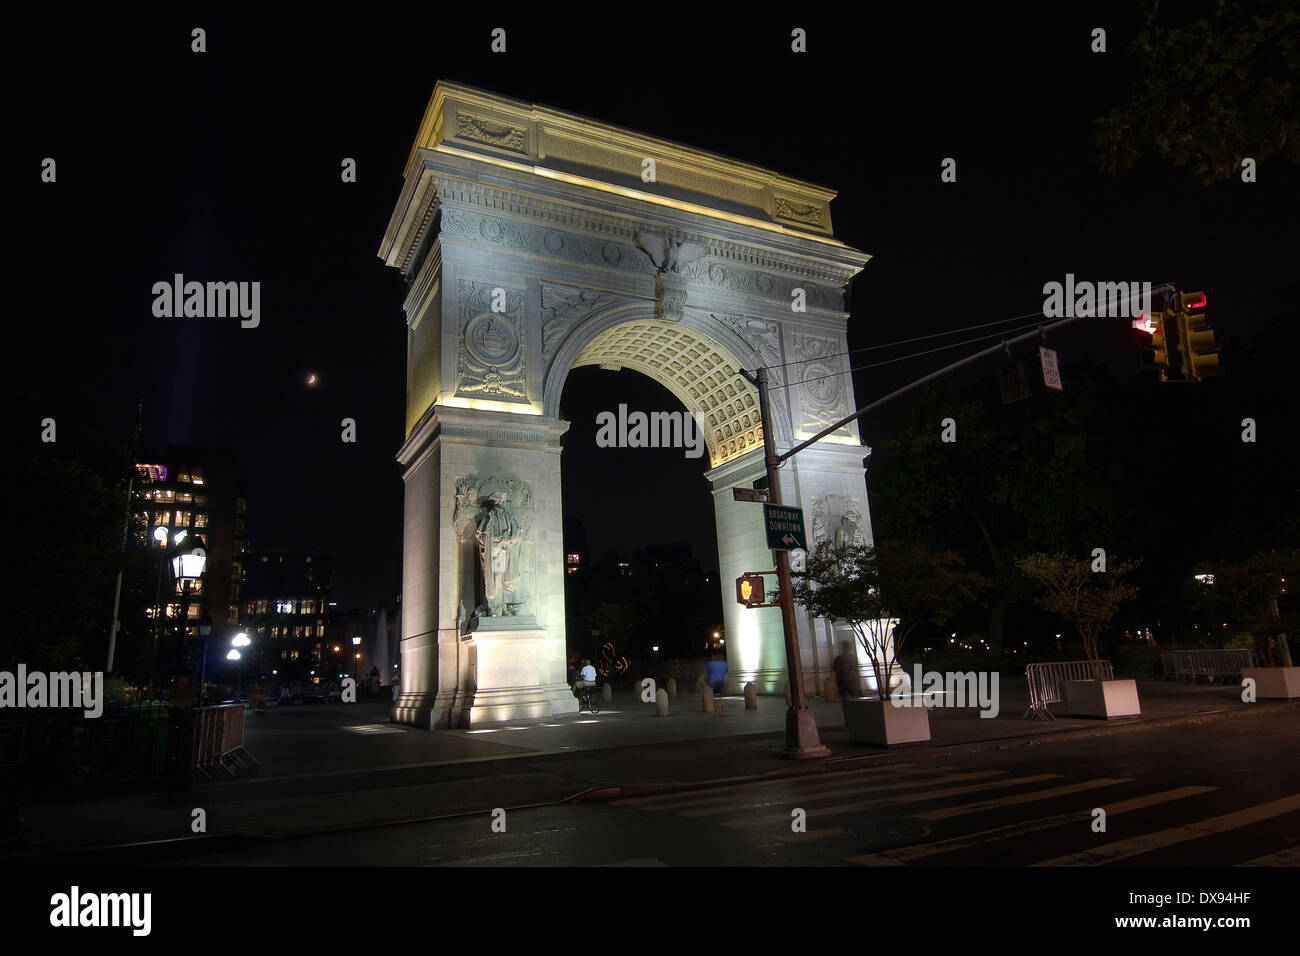 Looking South at the Washington Square Arch illuminated at night seen from the corner of 4th St & 5th Ave in Greenwich Village Stock Photo